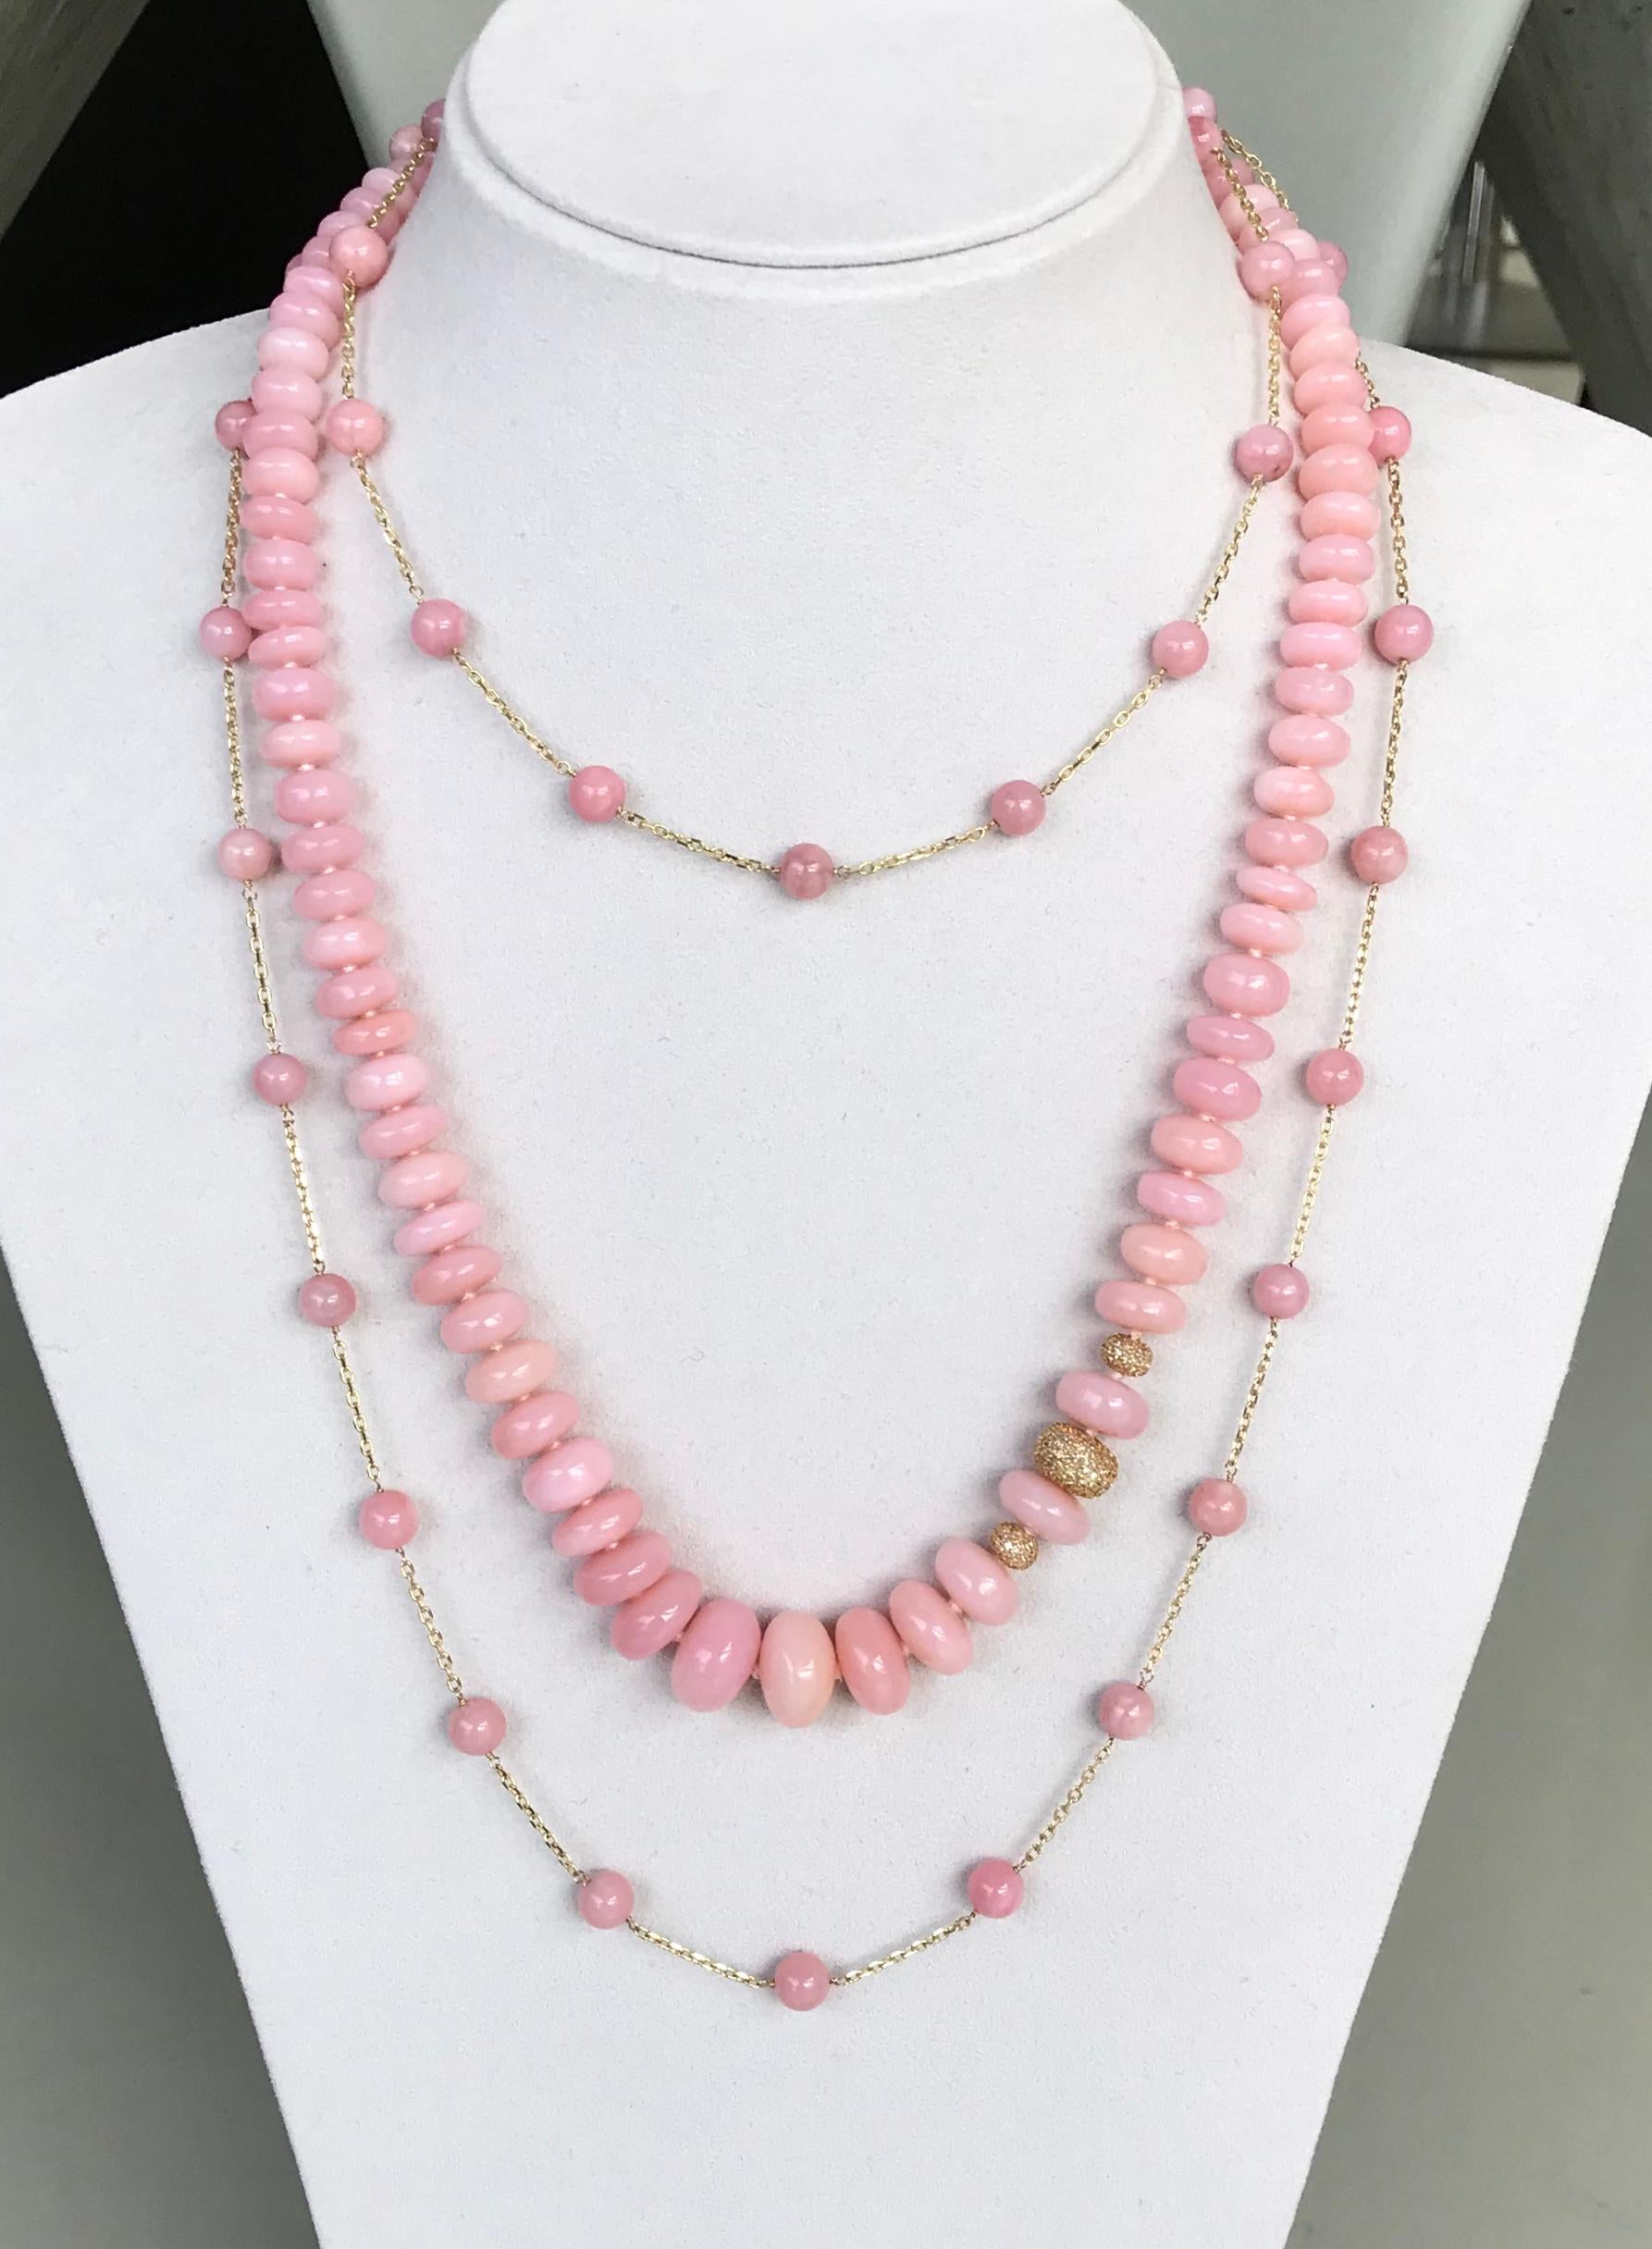 This Joon Han one-of-a-kind pink opal beads station chain necklace is delicately elegant and is a perfect accent piece. Wear it alone or layered with a pretty cocktail dress, a crisp white shirt or a soft sweater. Handcrafted in 14K yellow